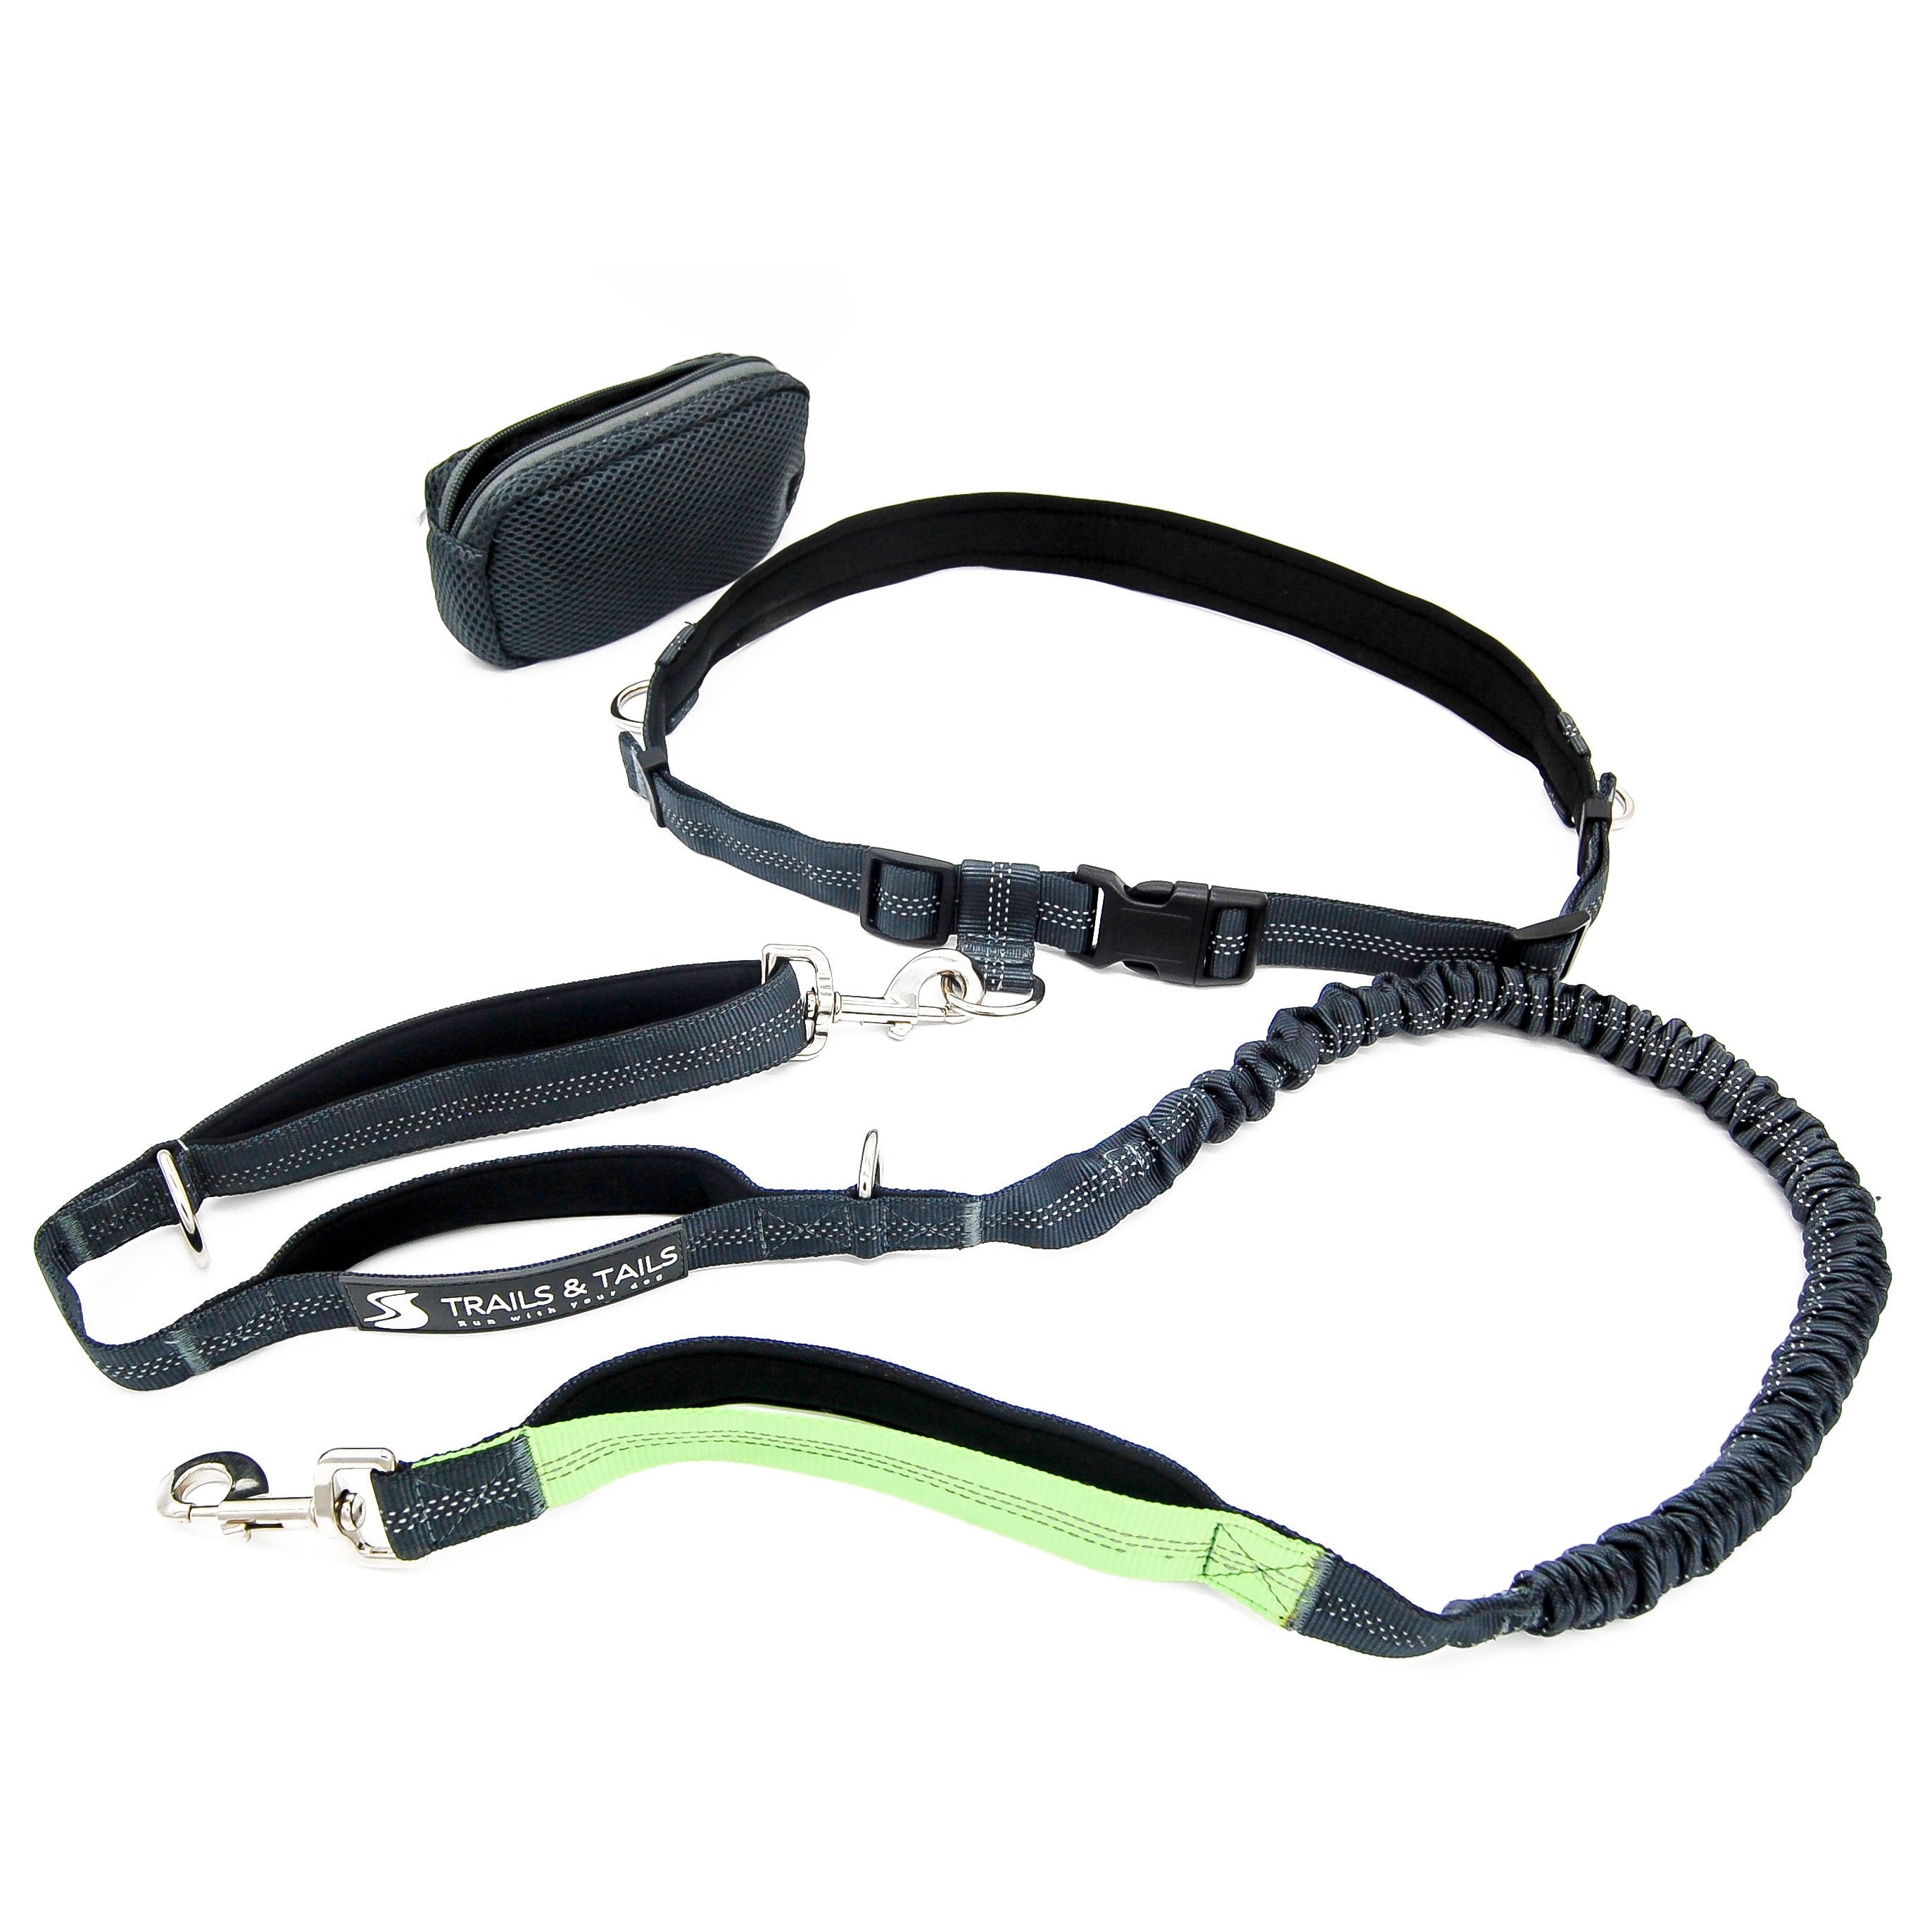 TRAILS & TAILS ULTIMATE HANDS-FREE DOG LEASH (GREY) - e4cents